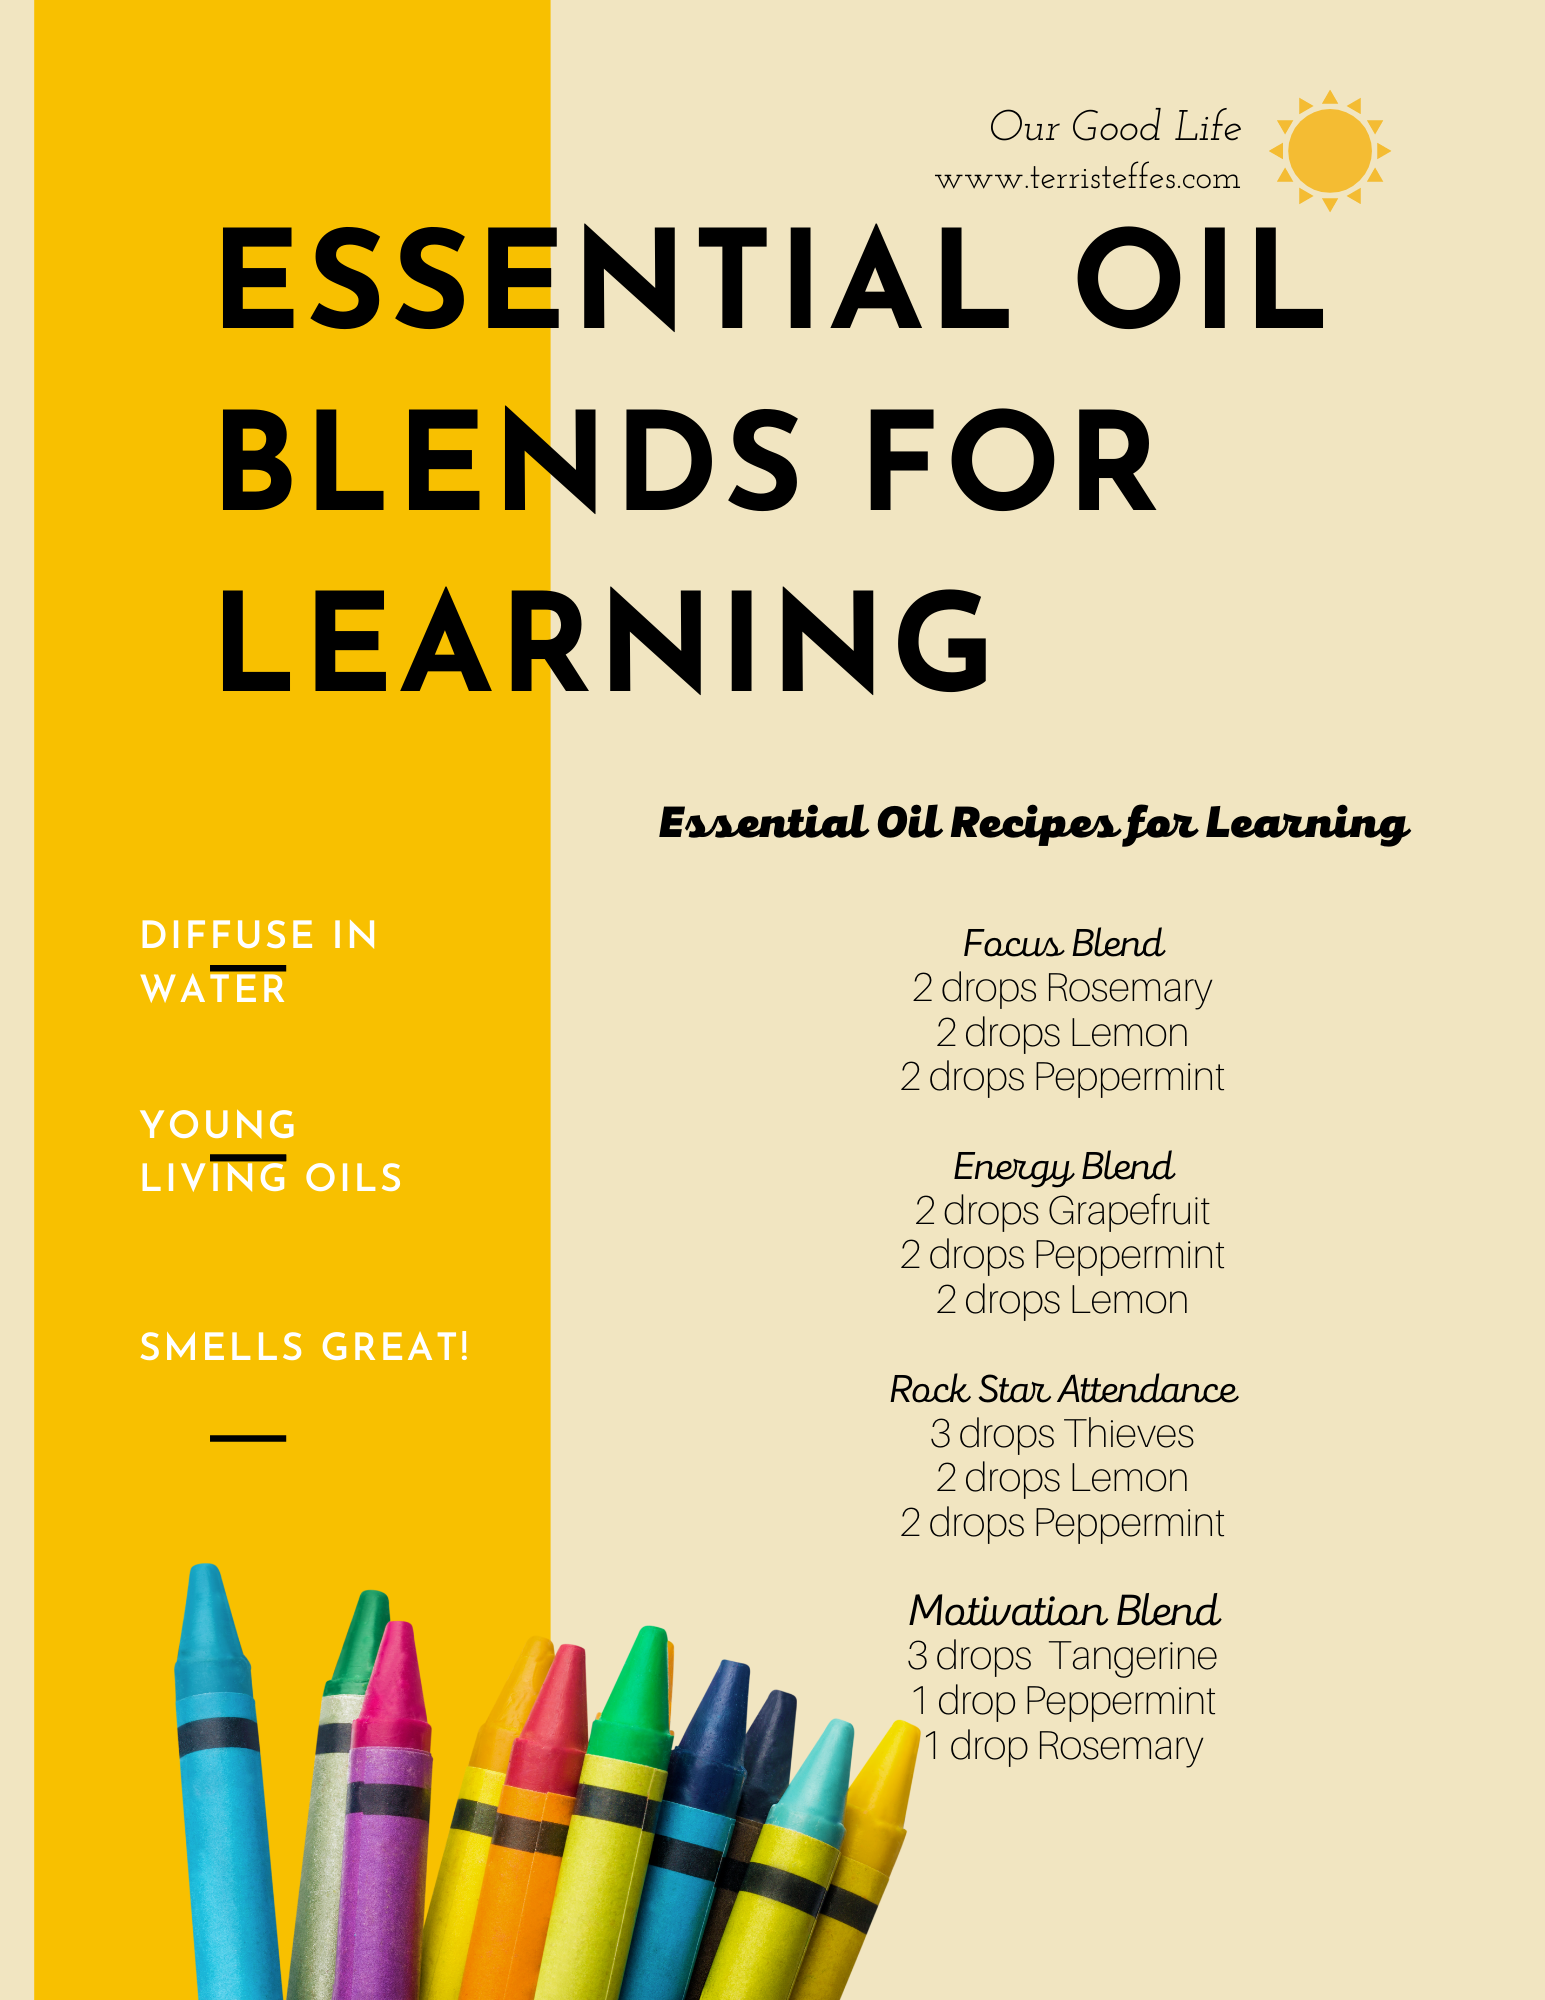 Essential Oils for Learning | Our Good Life